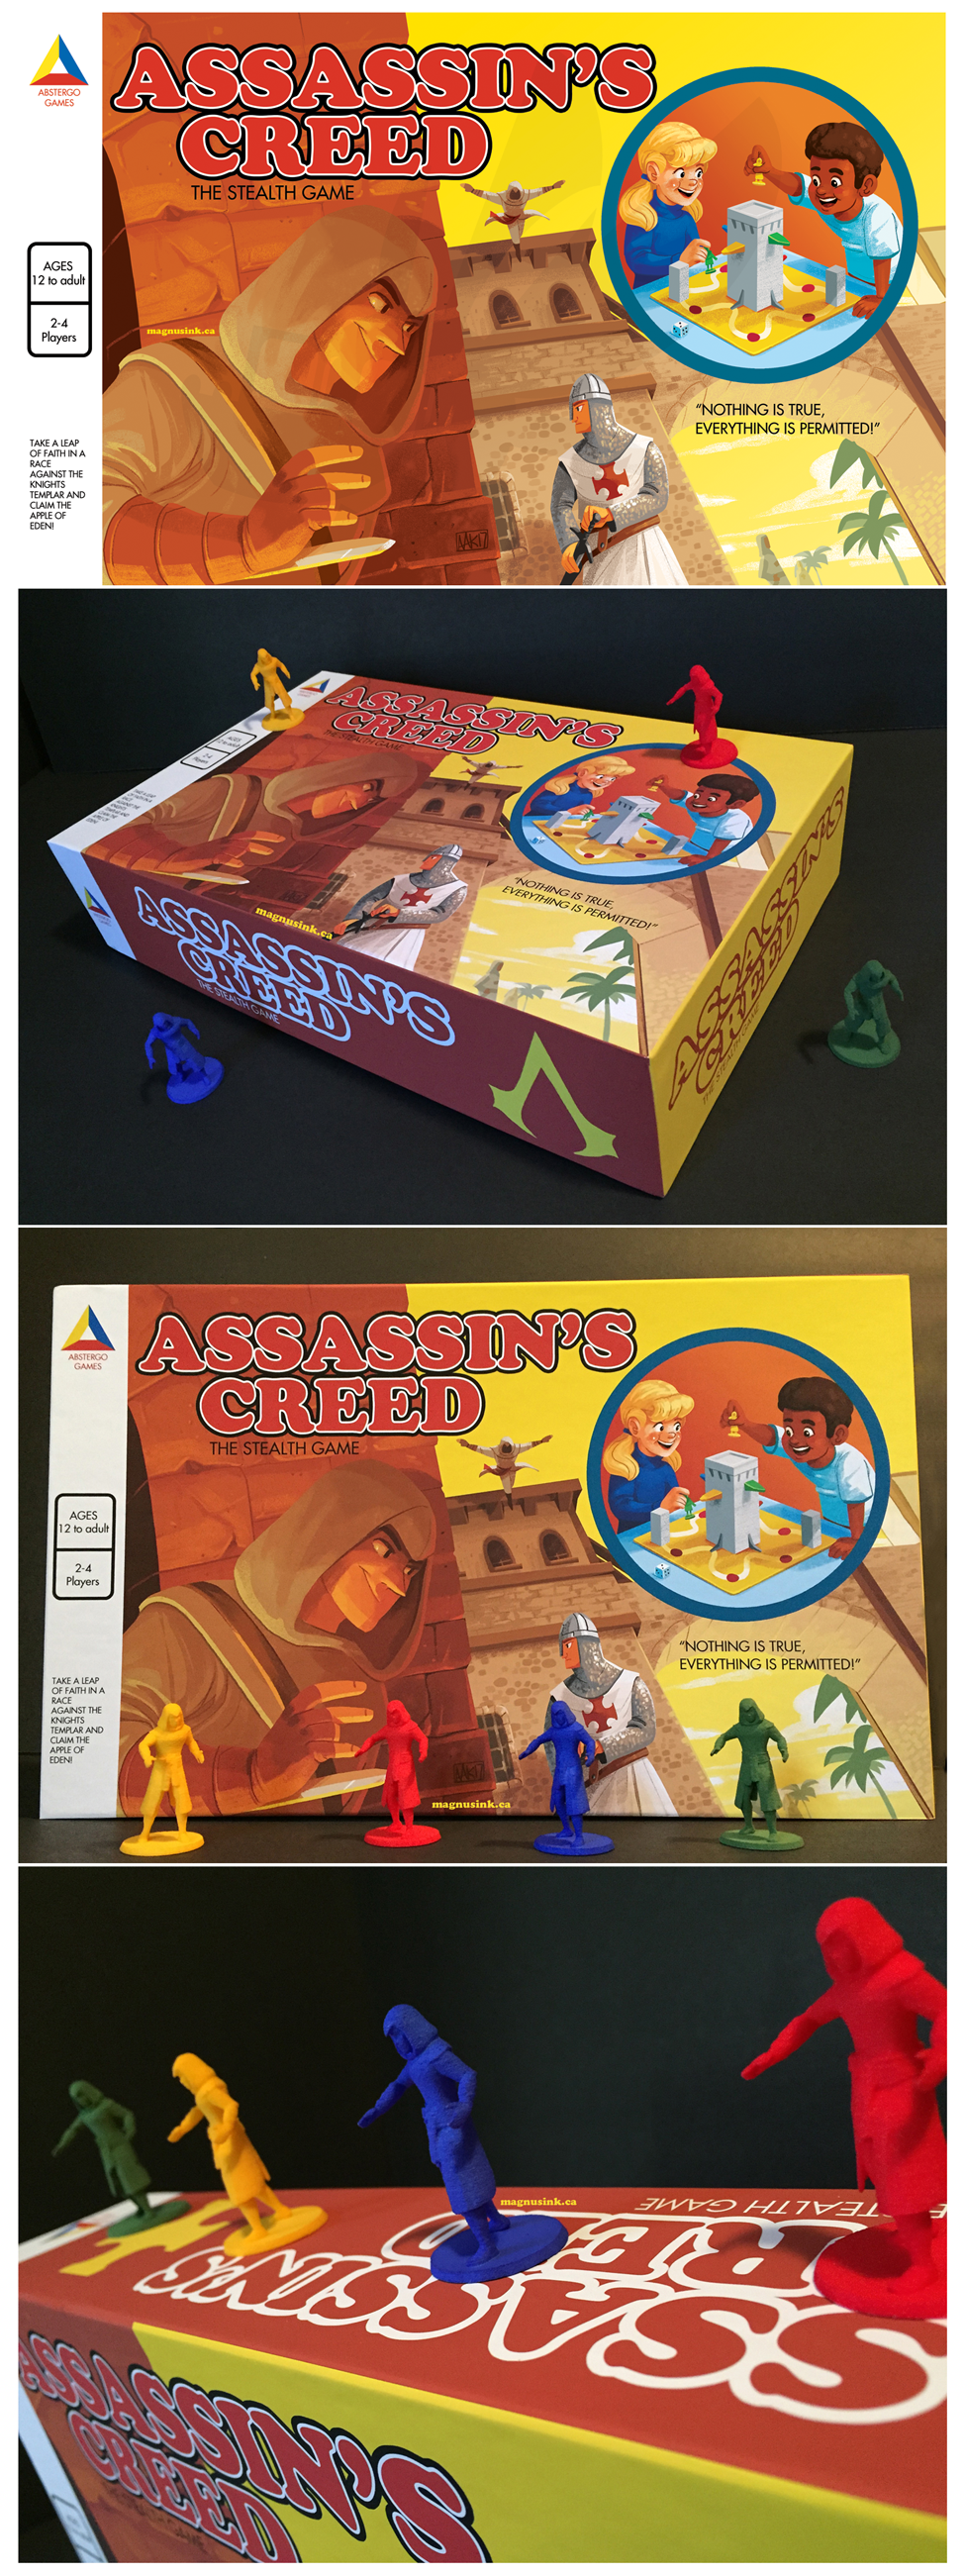 Assassin's Creed mock boardgame